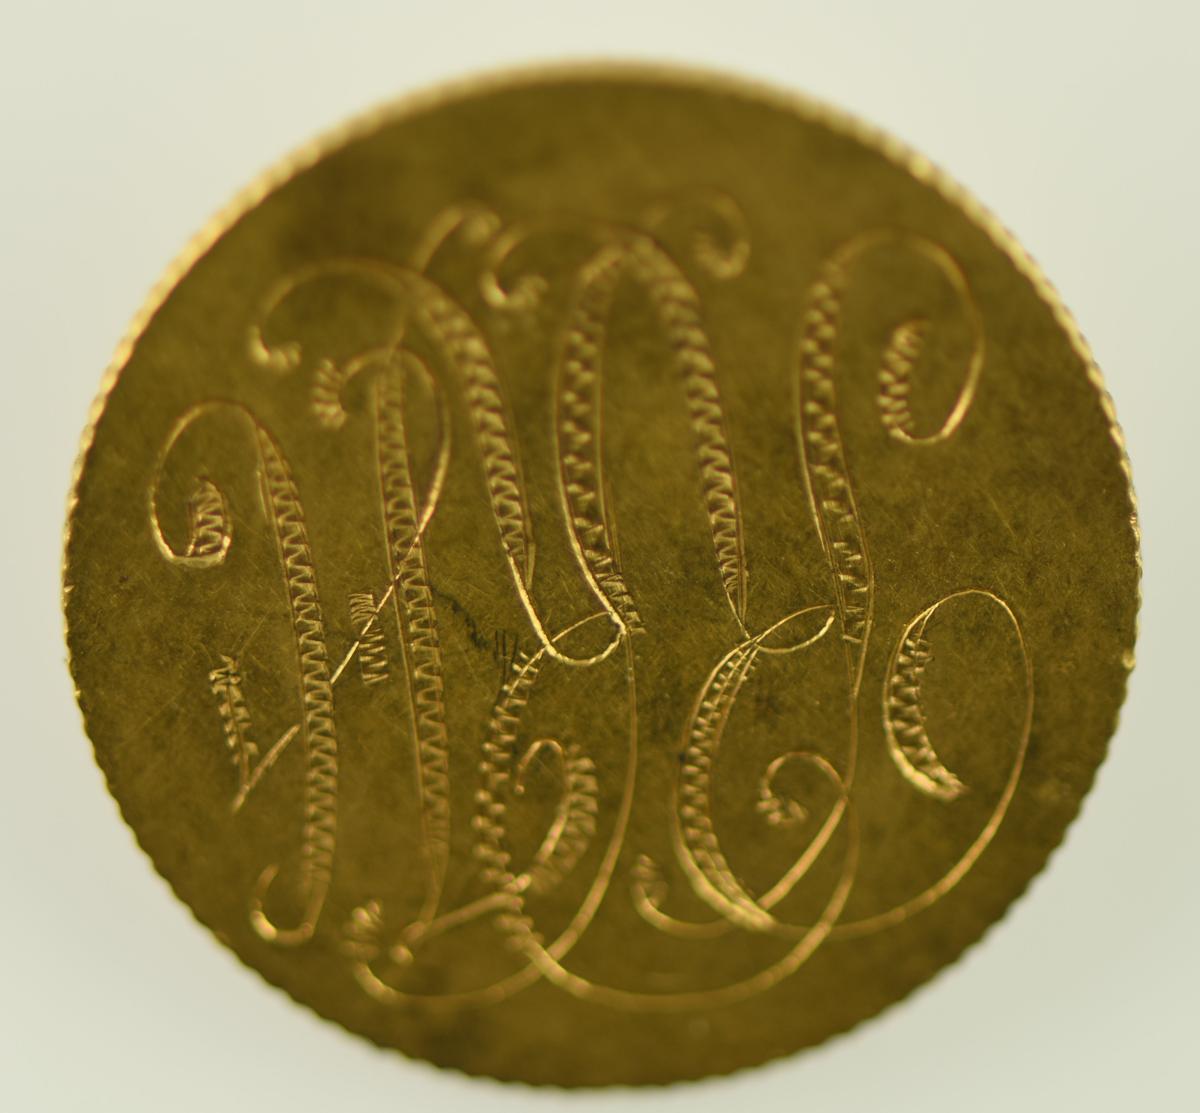 Lot #17 - 1881 $5 Gold Coin made into a Love Pin . Head is readable. Pin has been soldered on.